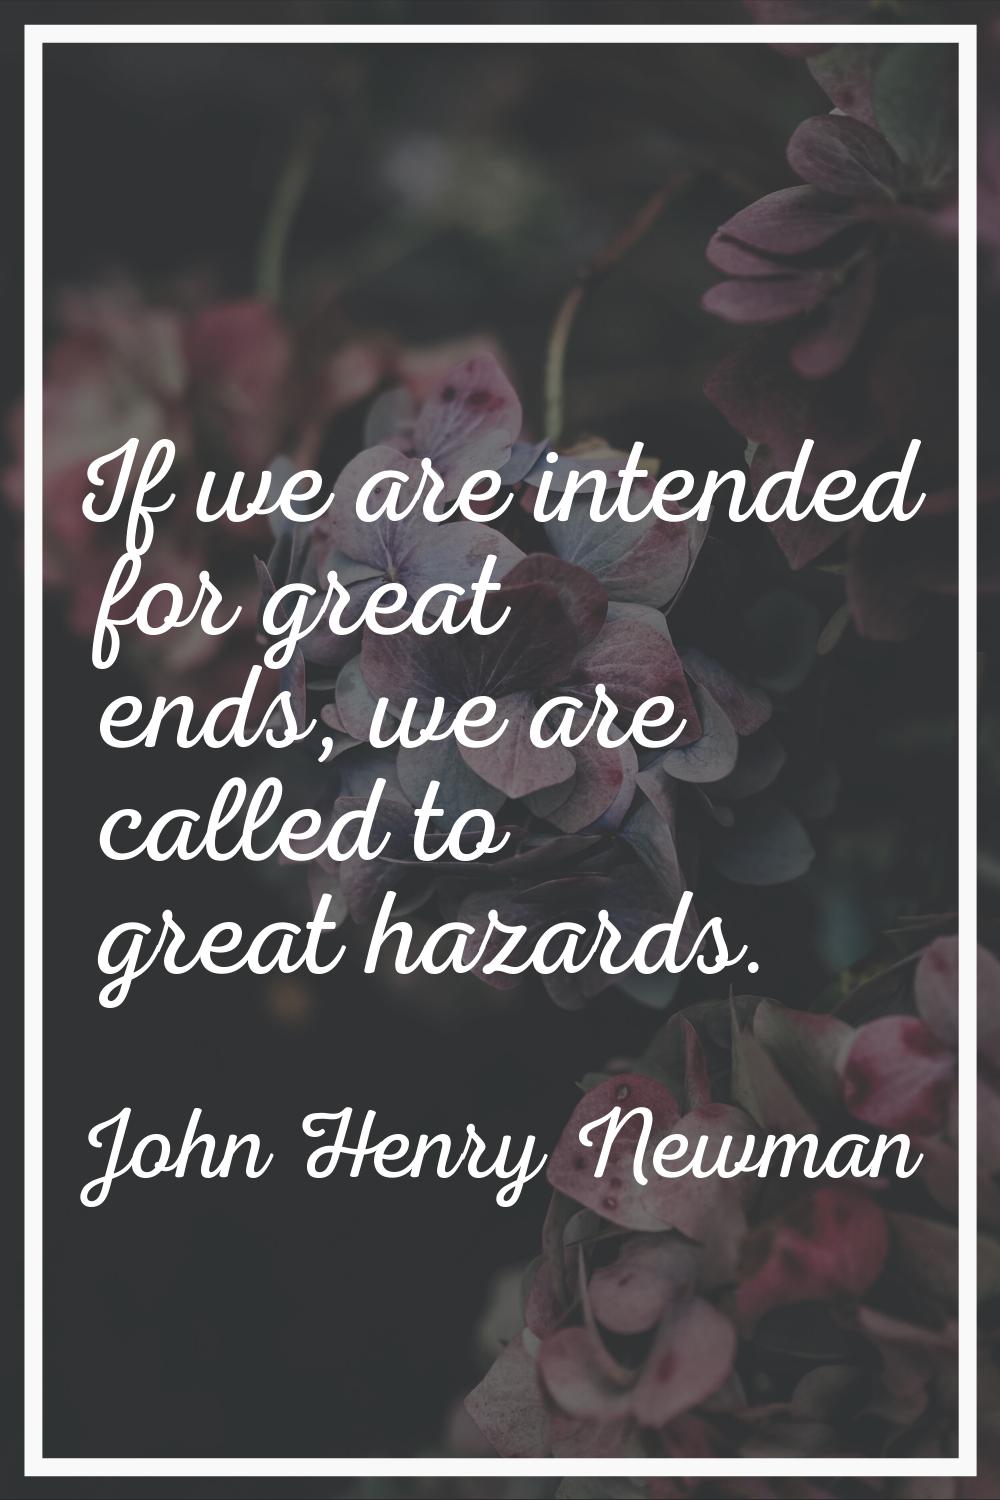 If we are intended for great ends, we are called to great hazards.